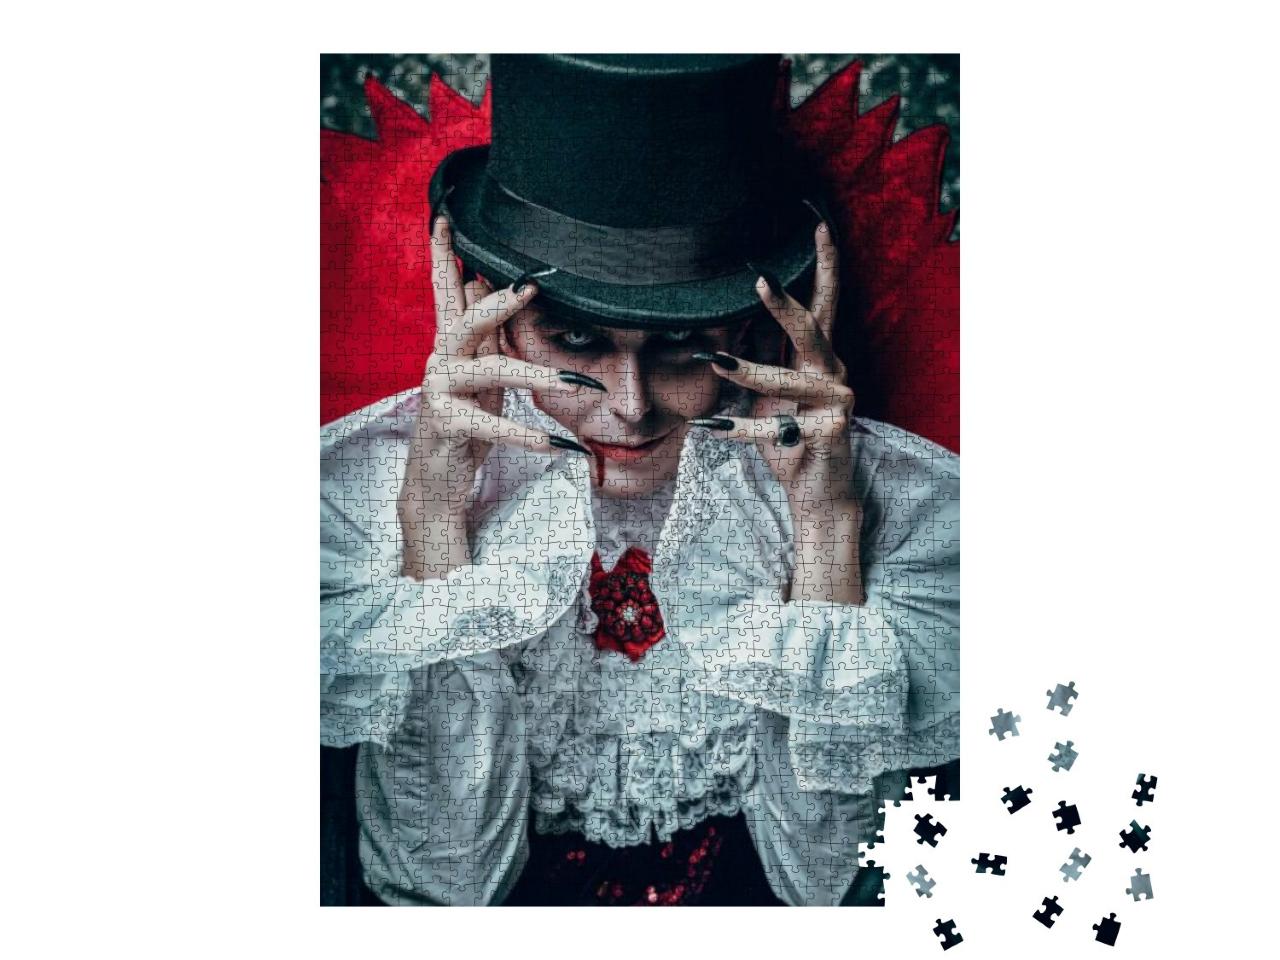 Portrait of a Traditional Vampire Aristocrat of the 19th... Jigsaw Puzzle with 1000 pieces